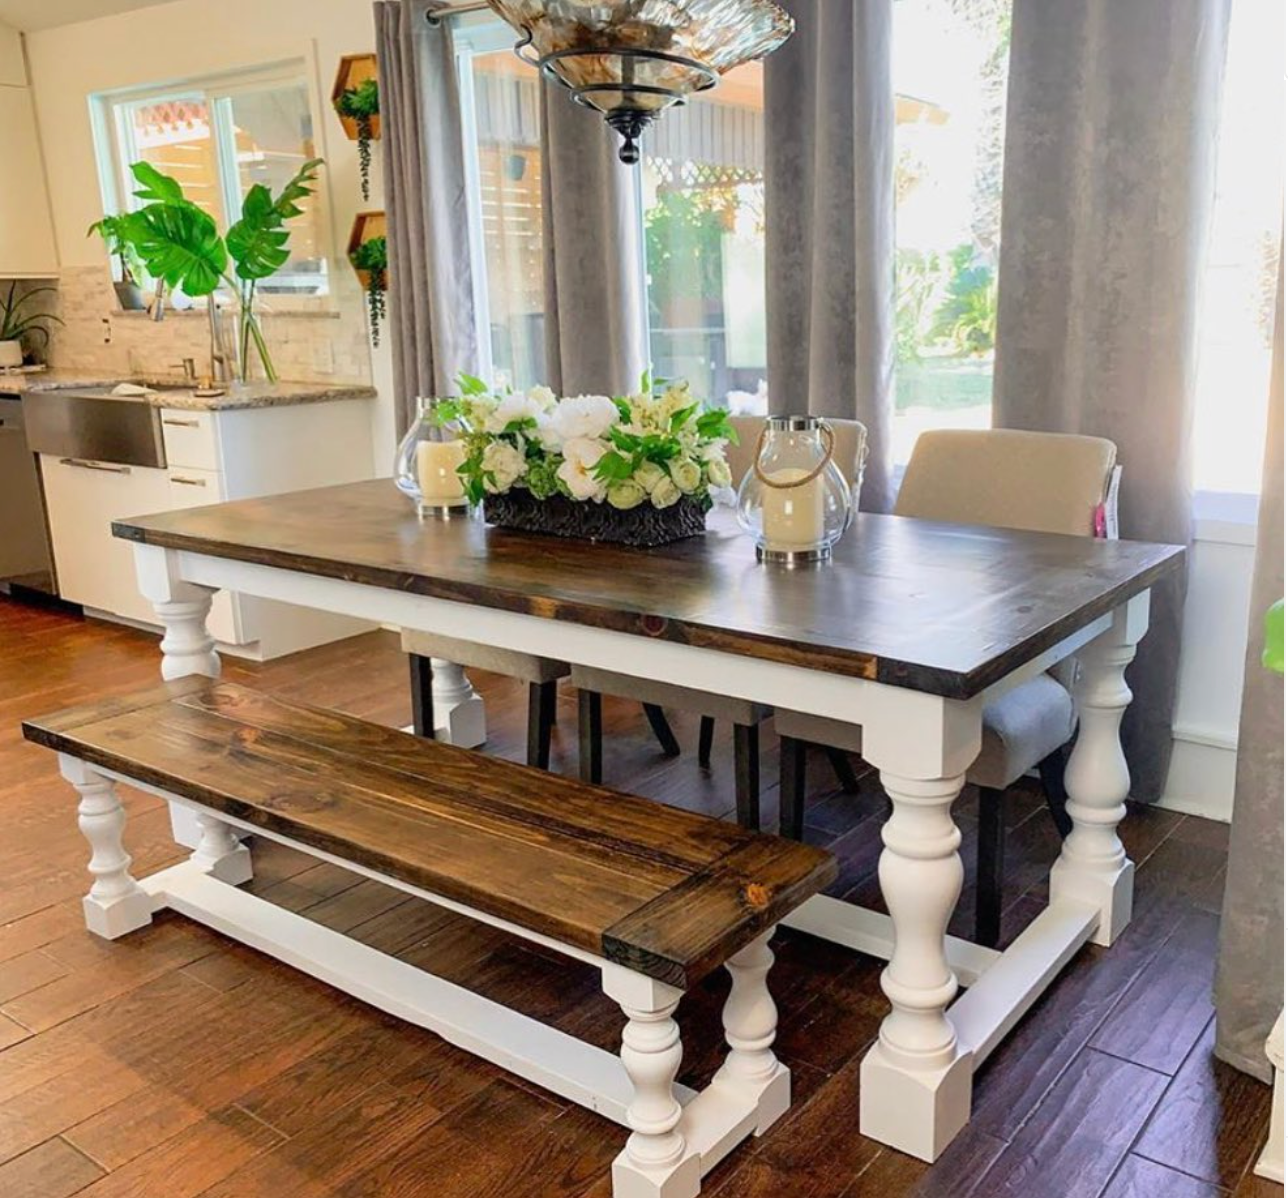 Maple monastery dining table legs and bench legs combo. Handmade in NC by Carolina Leg Co